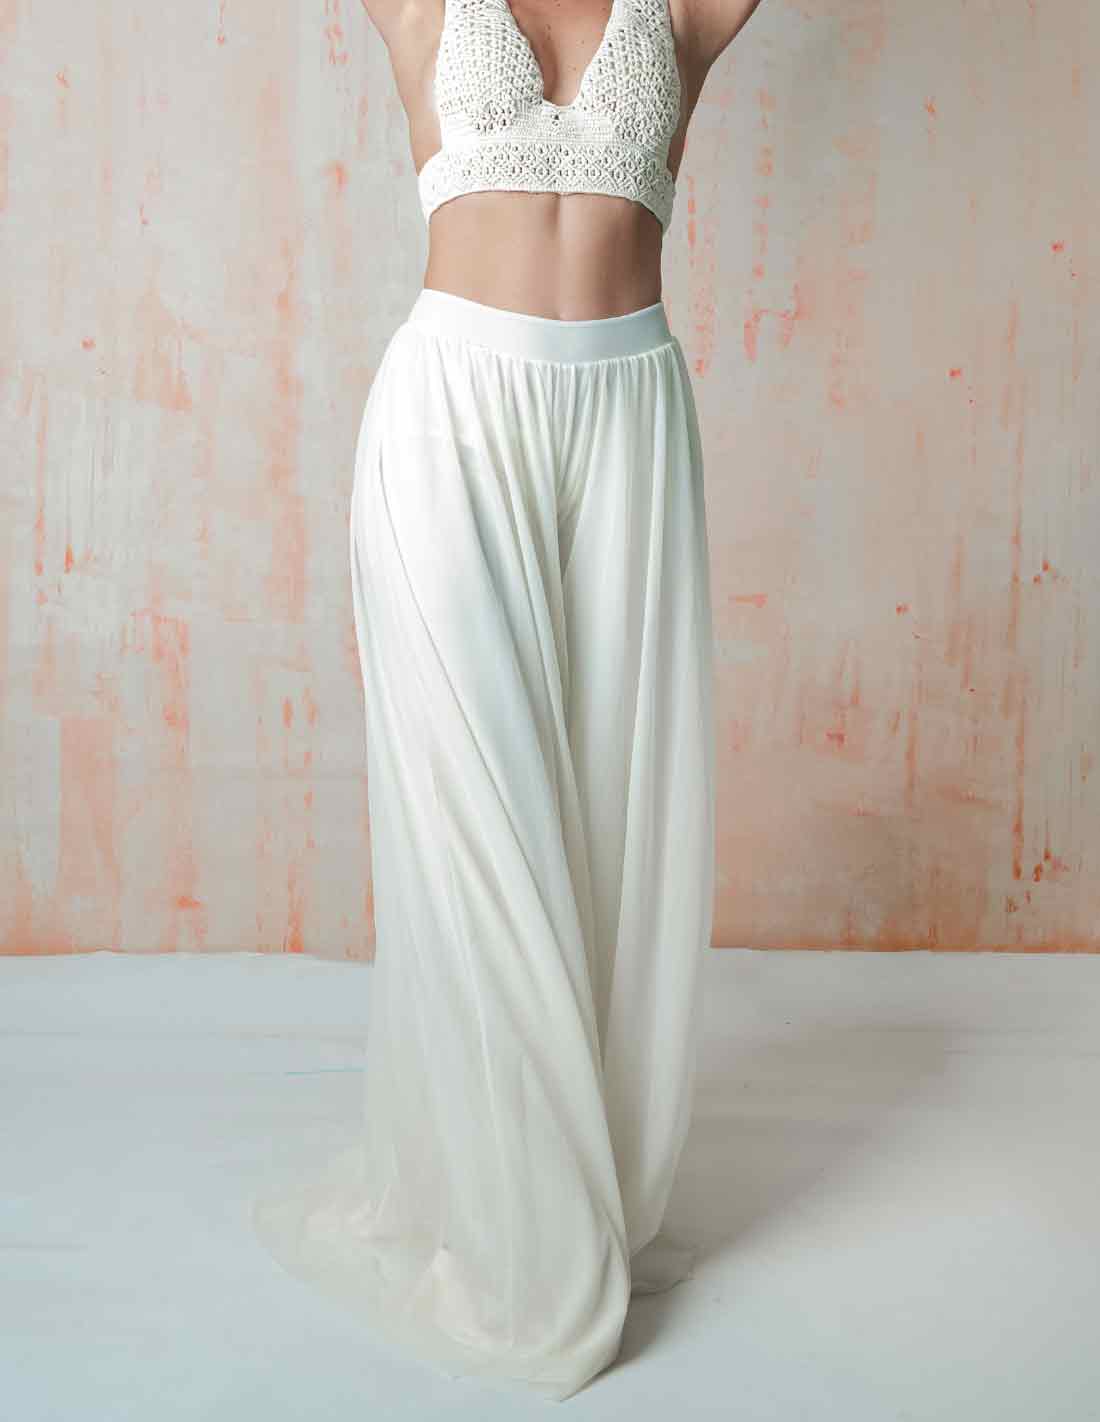 Nubes Pant Ivory. Beach Pant In Ivory. Entreaguas